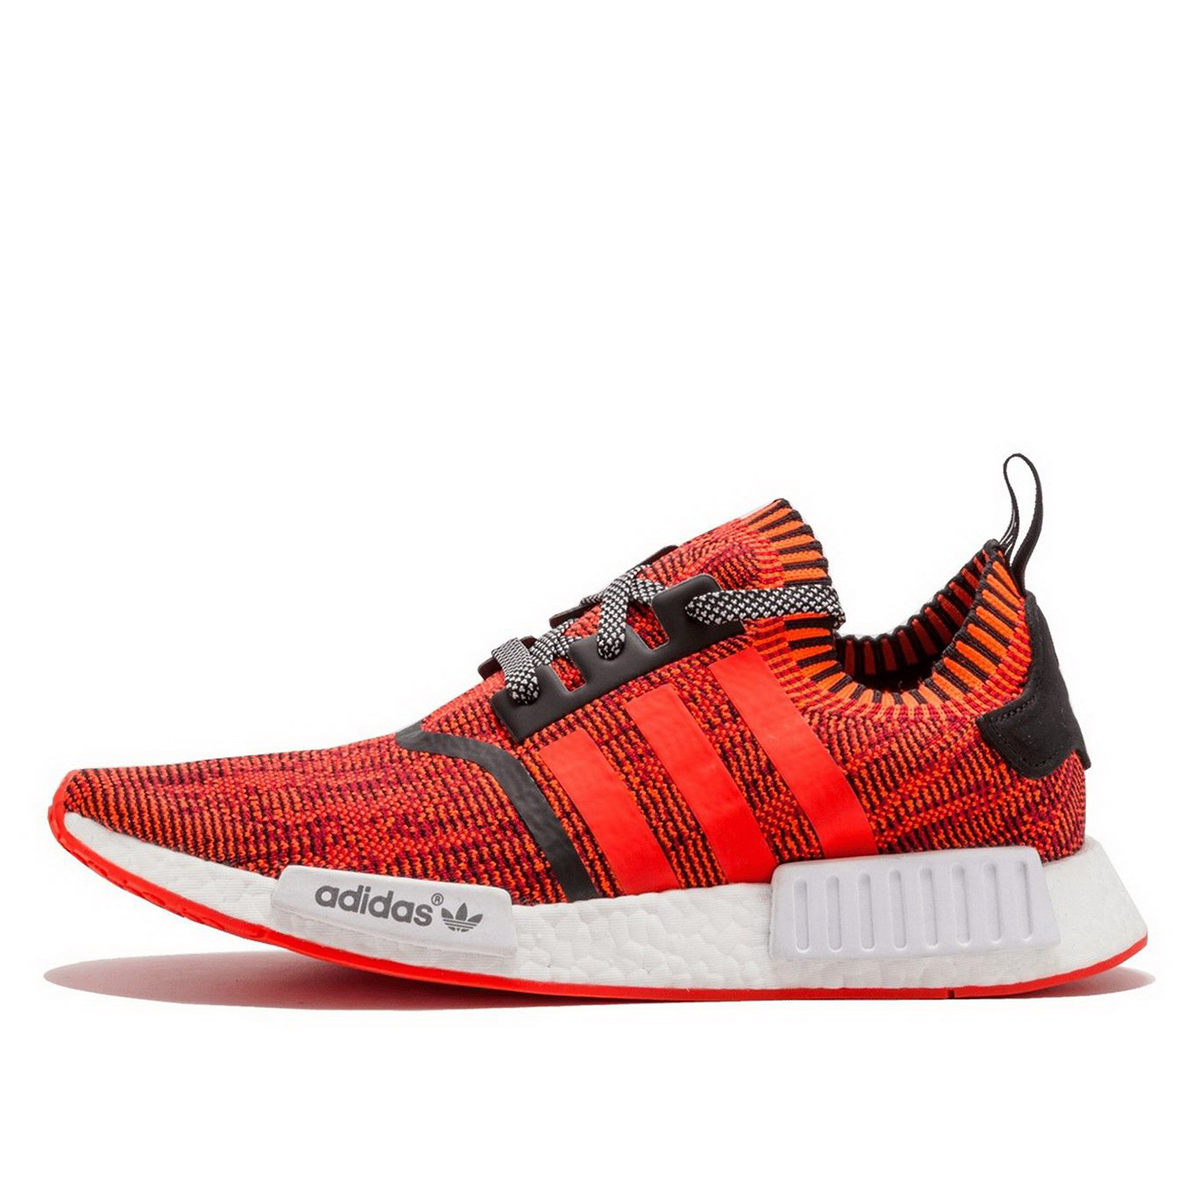 Adidas NMD R1 Triple Red US 10.5 UK 10 brand new 100% Authentic